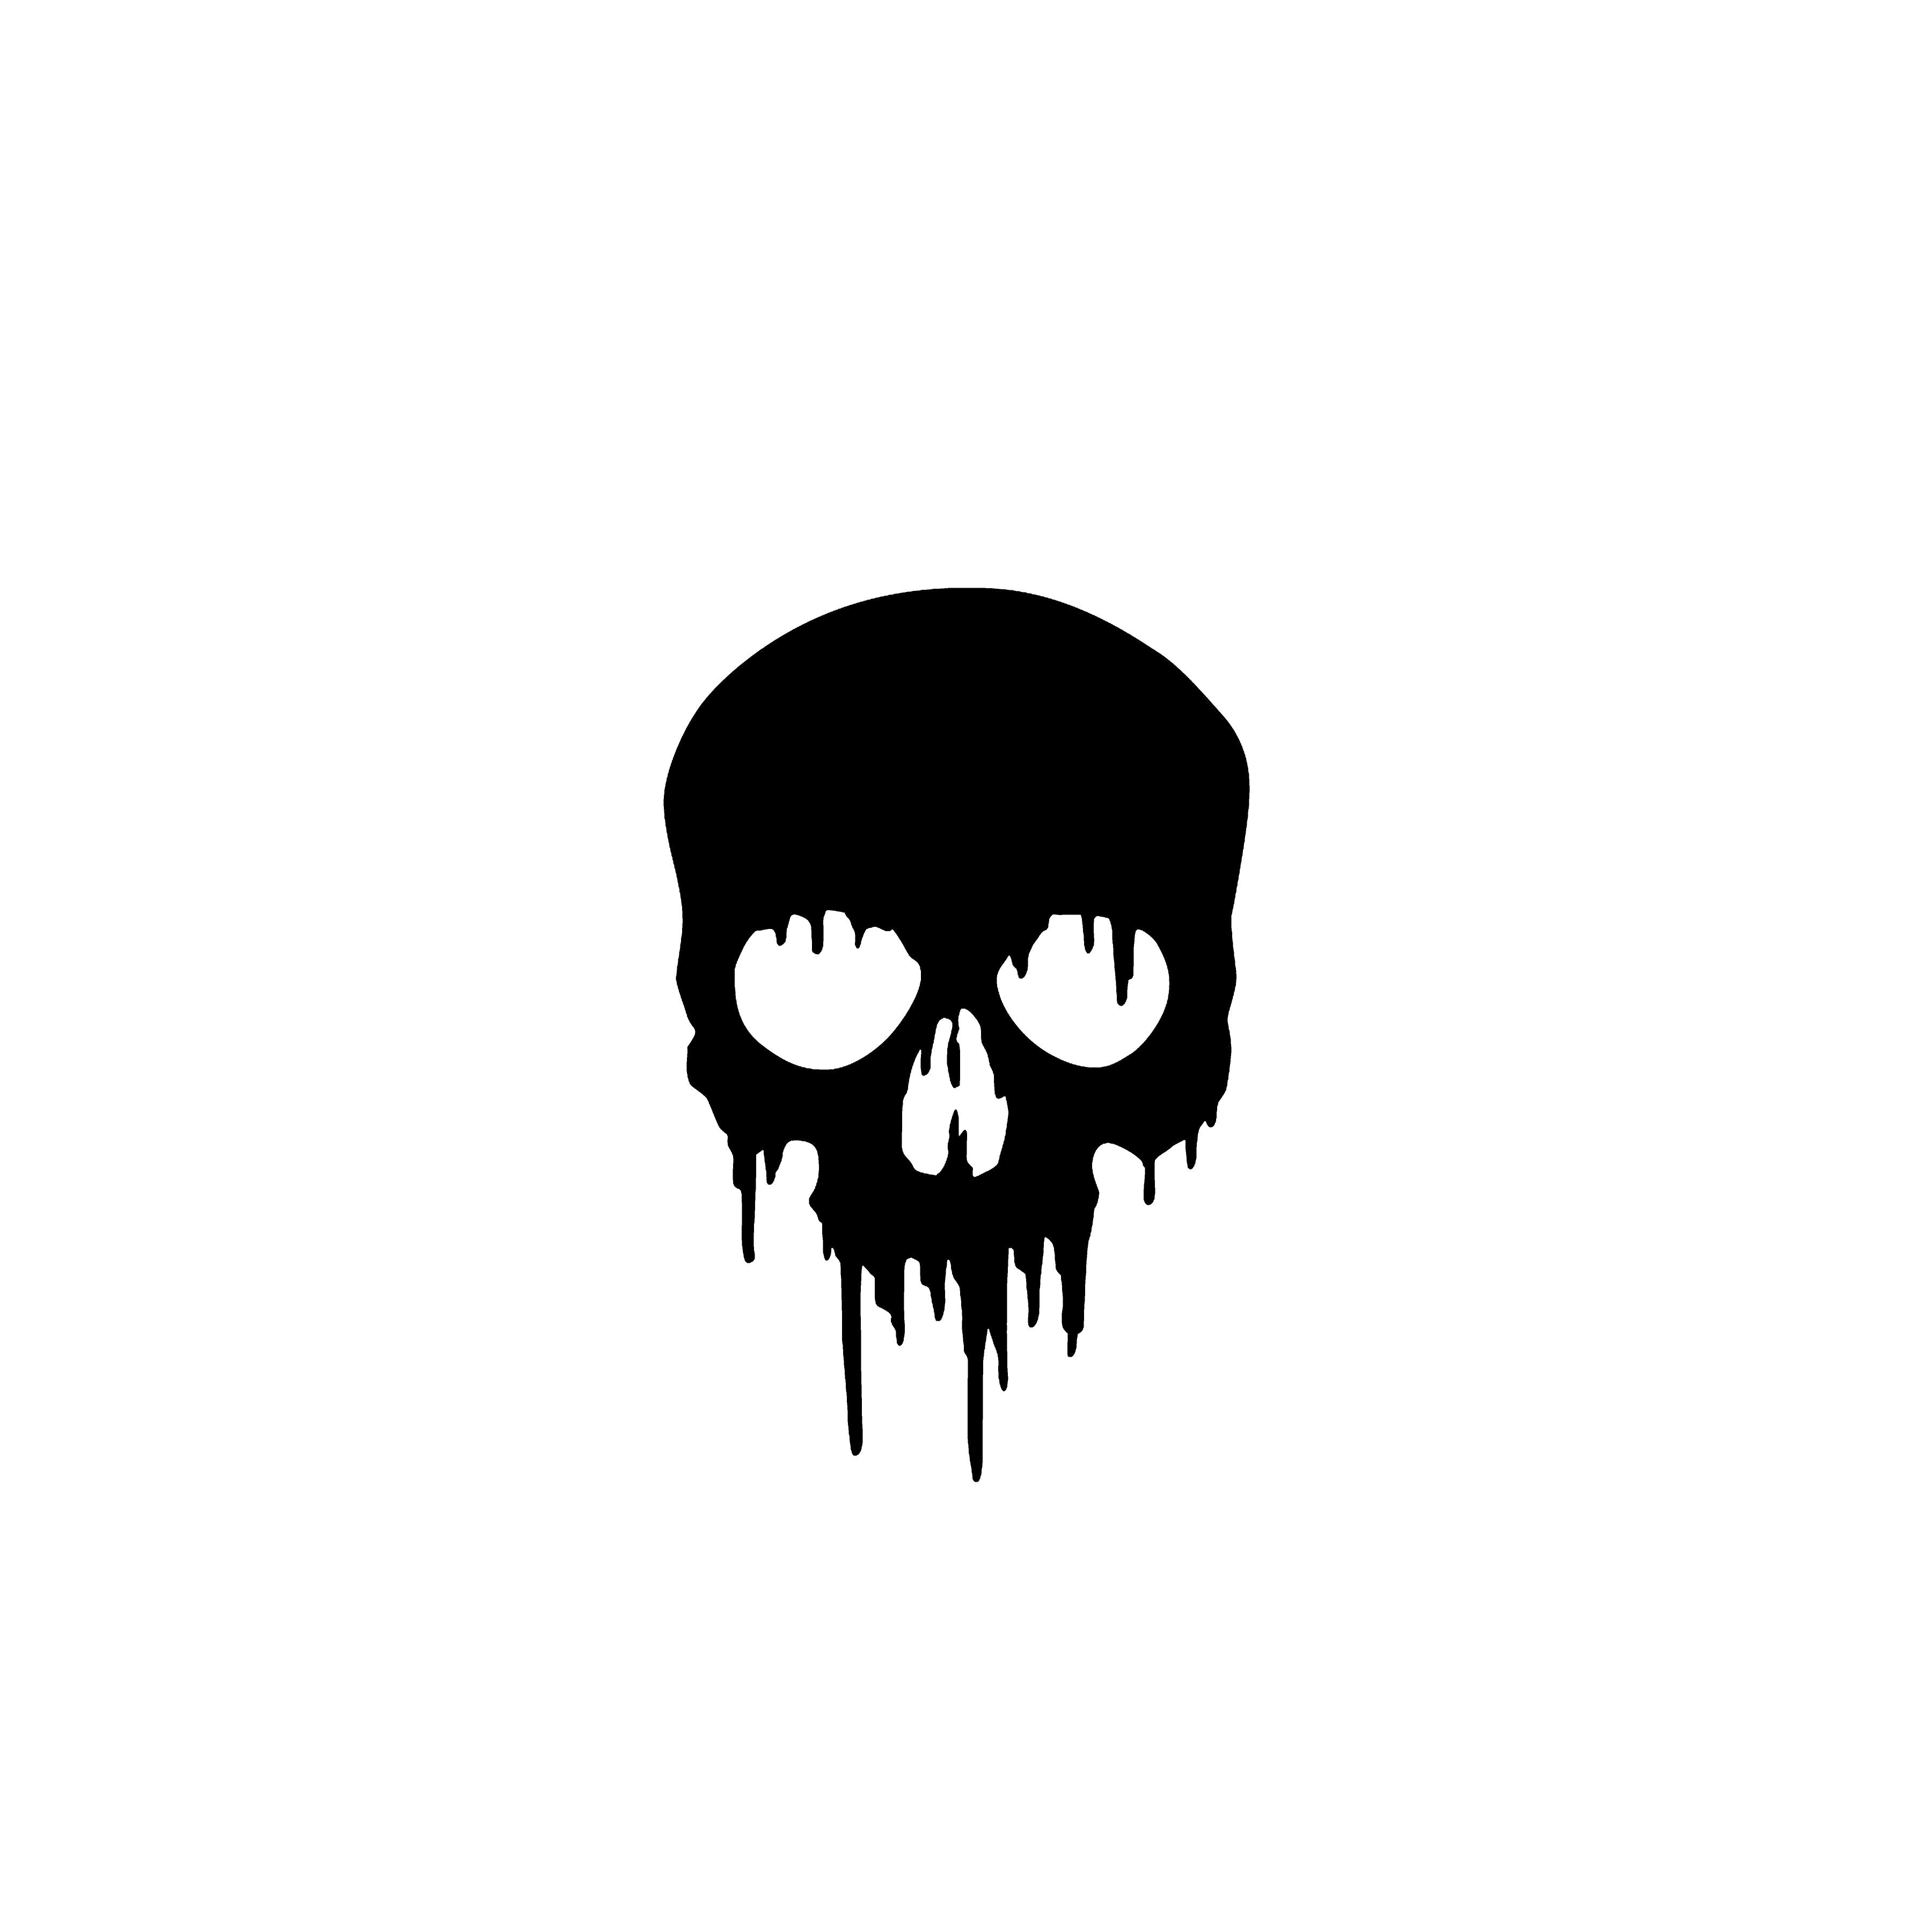 Skull Head Dace Vector Illustration Blood Dripping Design Stock Photo,  Picture and Royalty Free Image. Image 149554464.